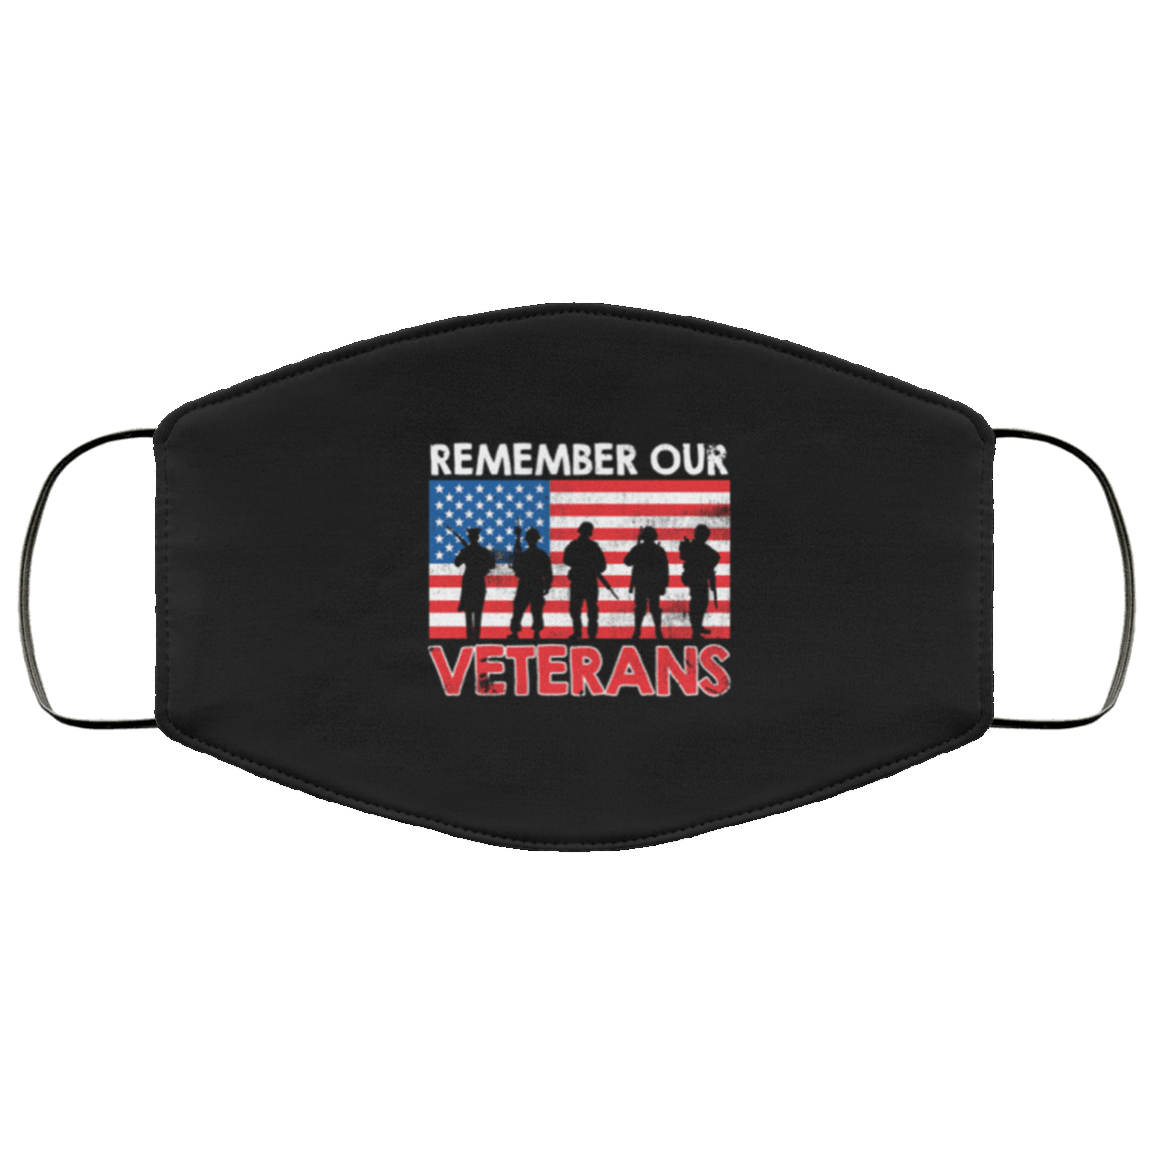 Designs by MyUtopia Shout Out:Remember Our Veterans US Flag Adult Fabric Face Mask with Elastic Ear Loops,3 Layer Fabric Face Mask / Black / Adult,Fabric Face Mask